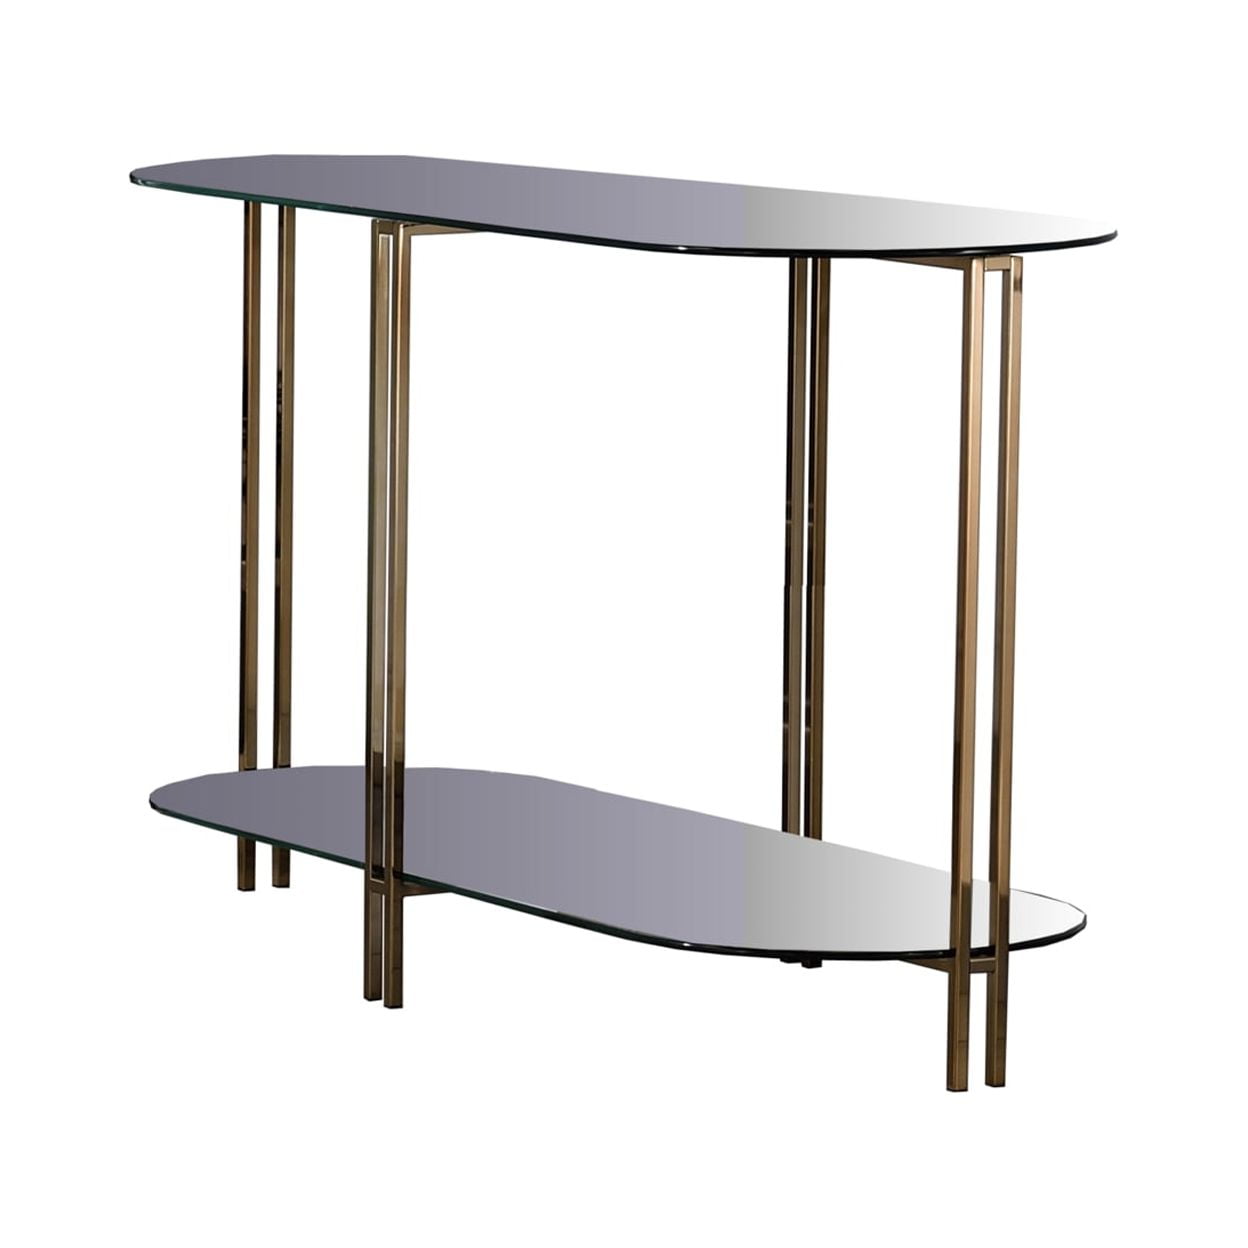 Picture of ACME Furniture 82999 47 x 18 x 30 in. Veises Sofa Table, Champagne